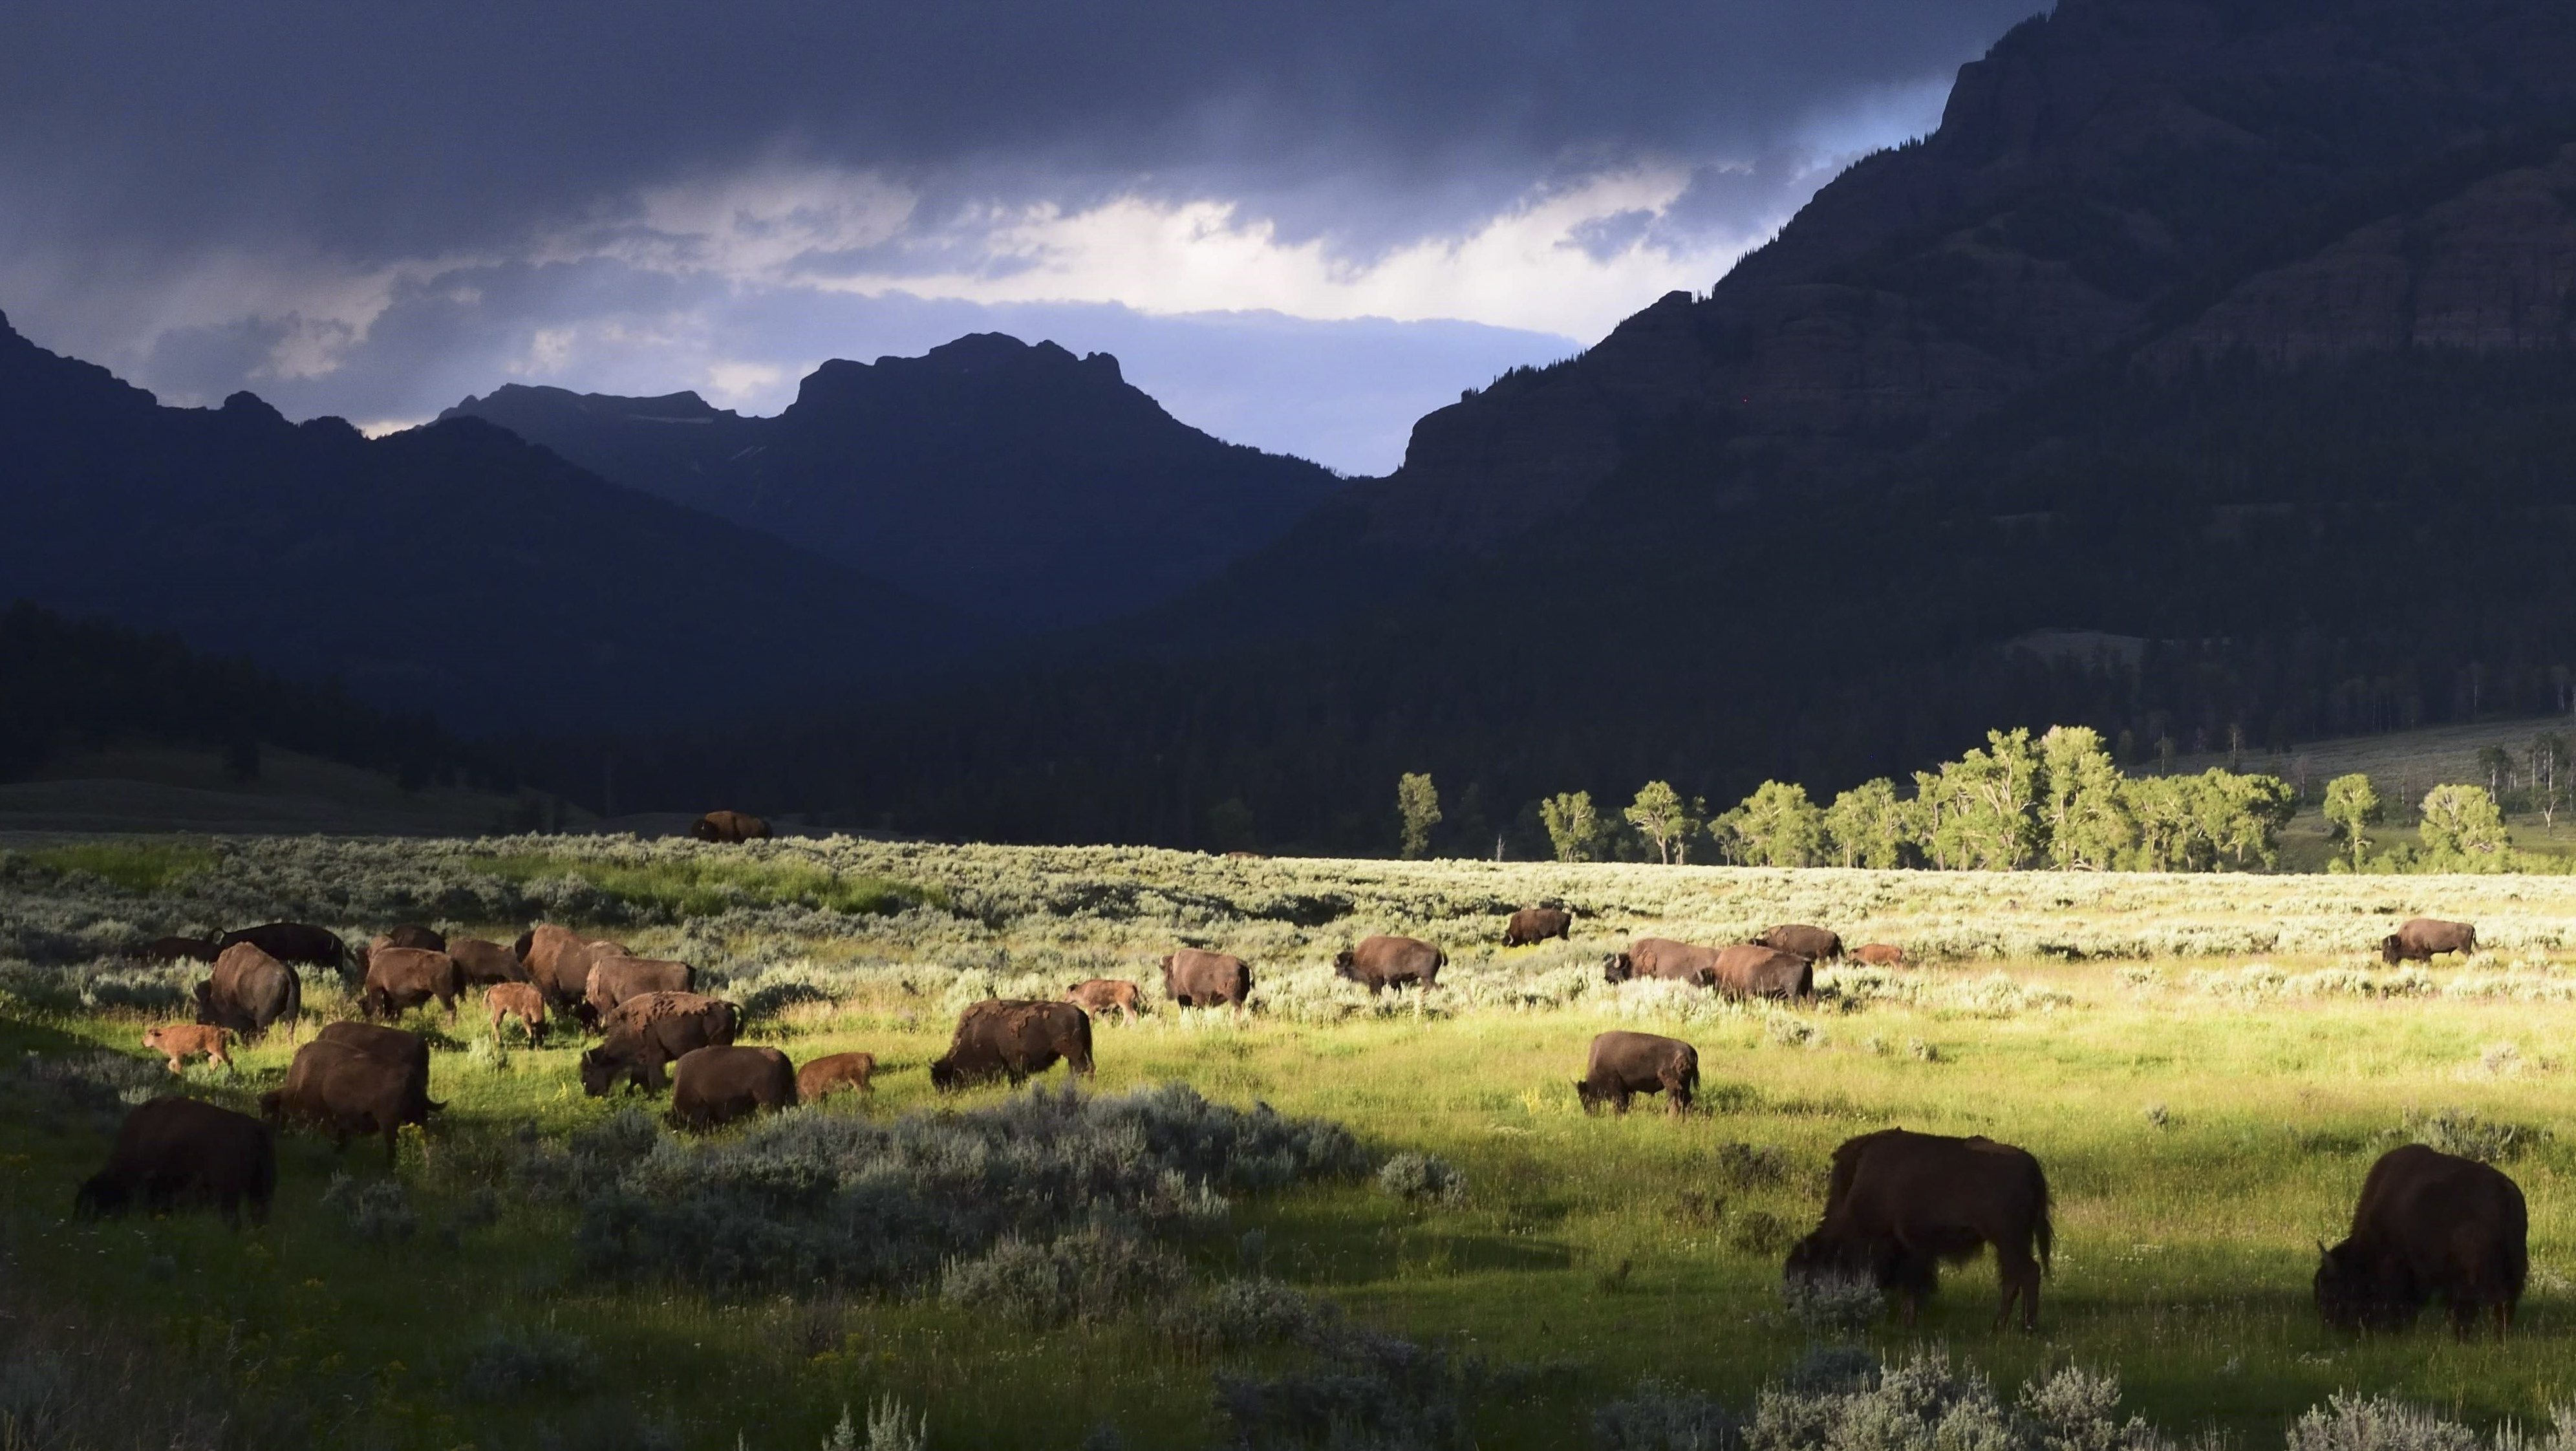 bison in a valley wth mountains in the background